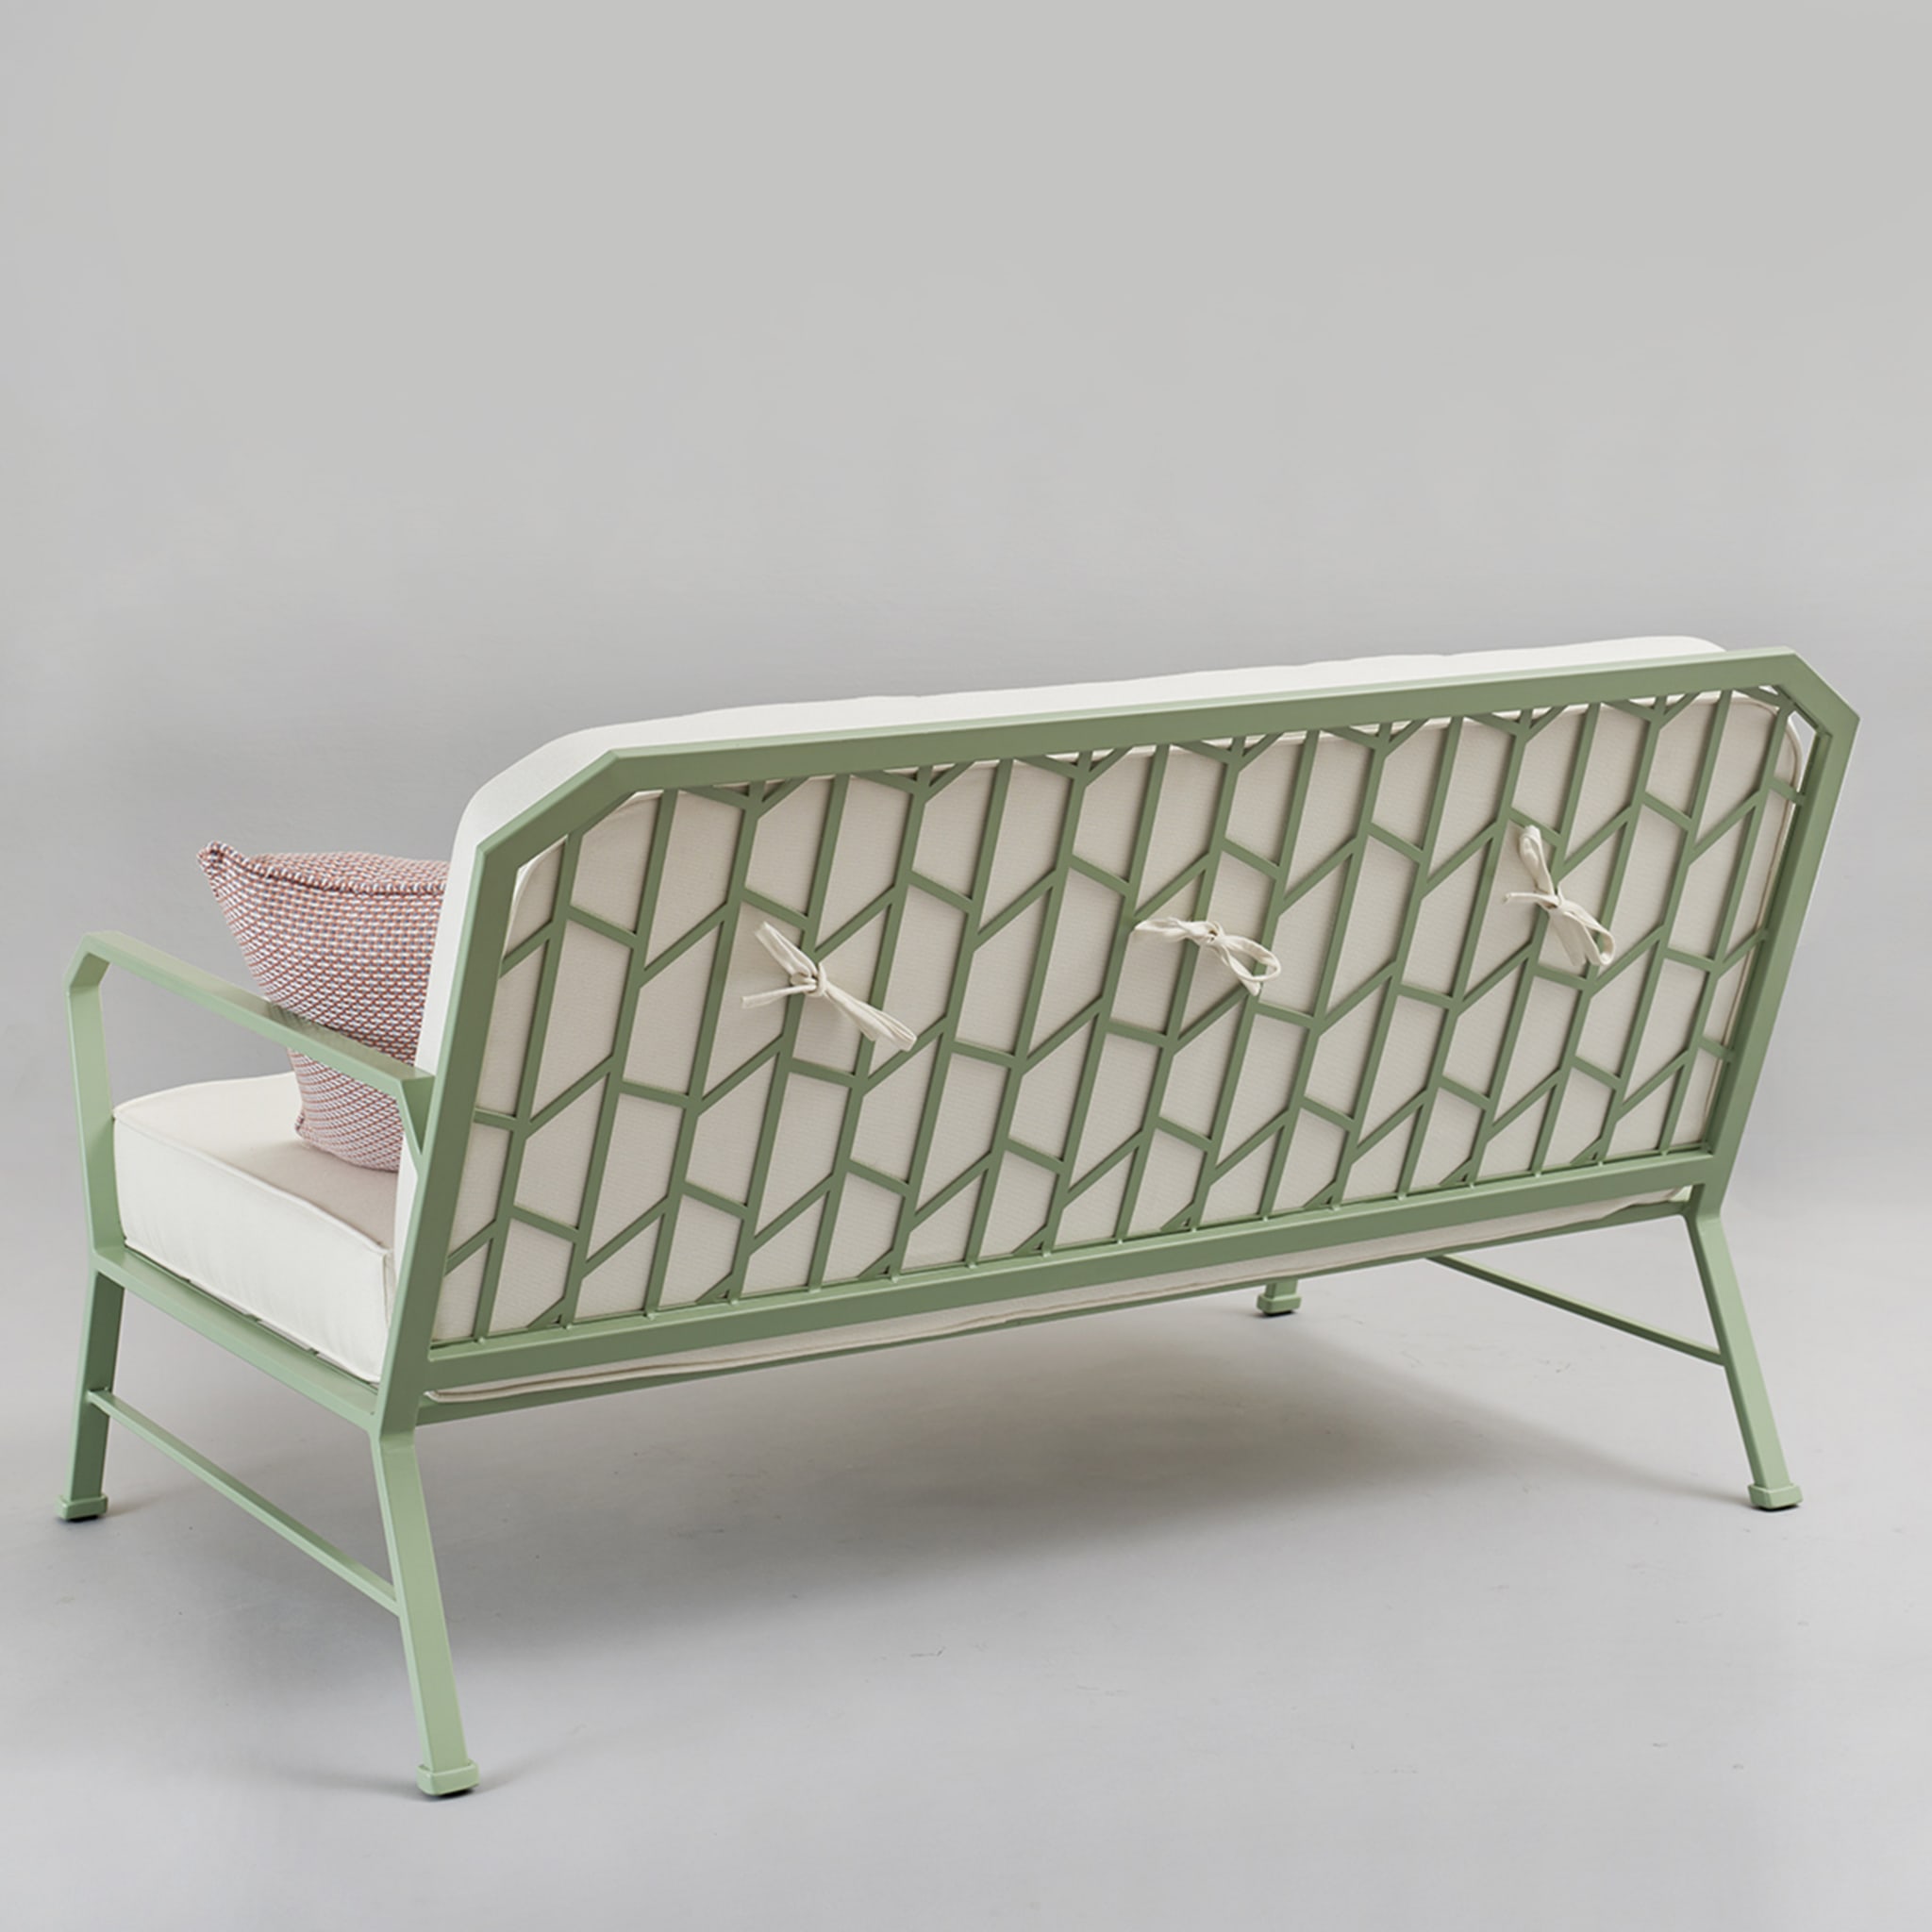 Forest Green & White Sofa by Officina Ciani - Alternative view 2